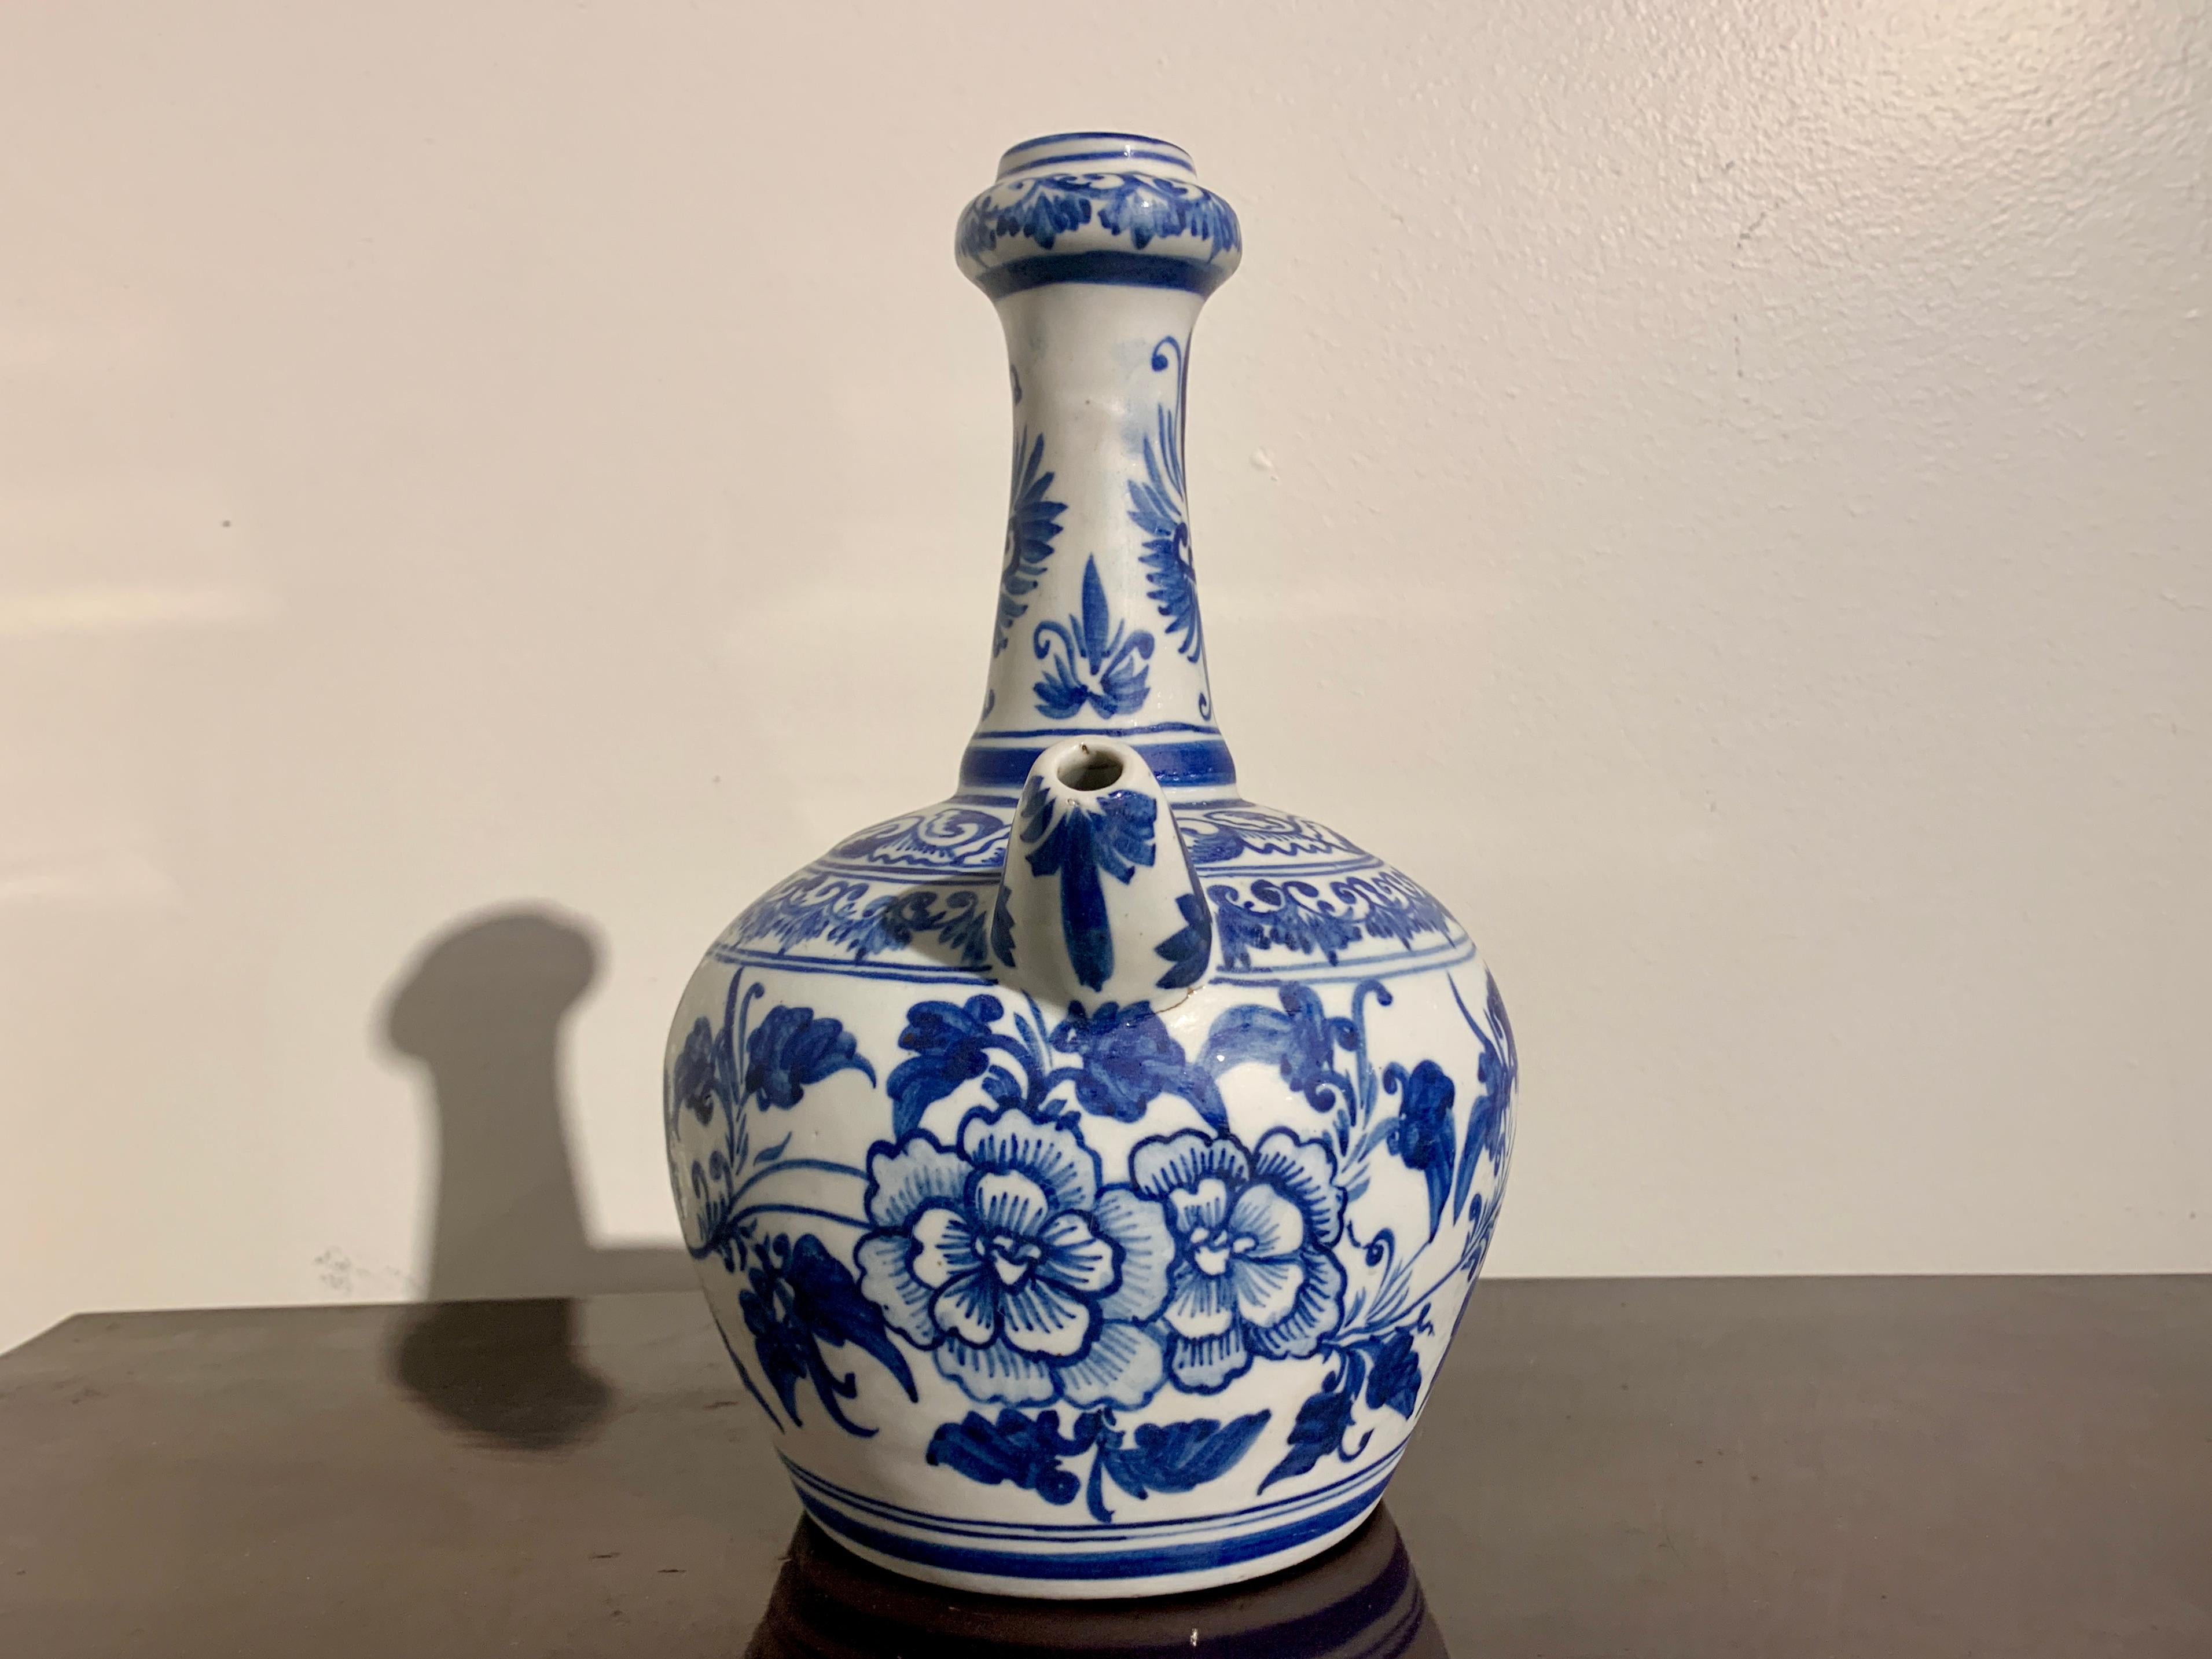 like much prized blue and white porcelain